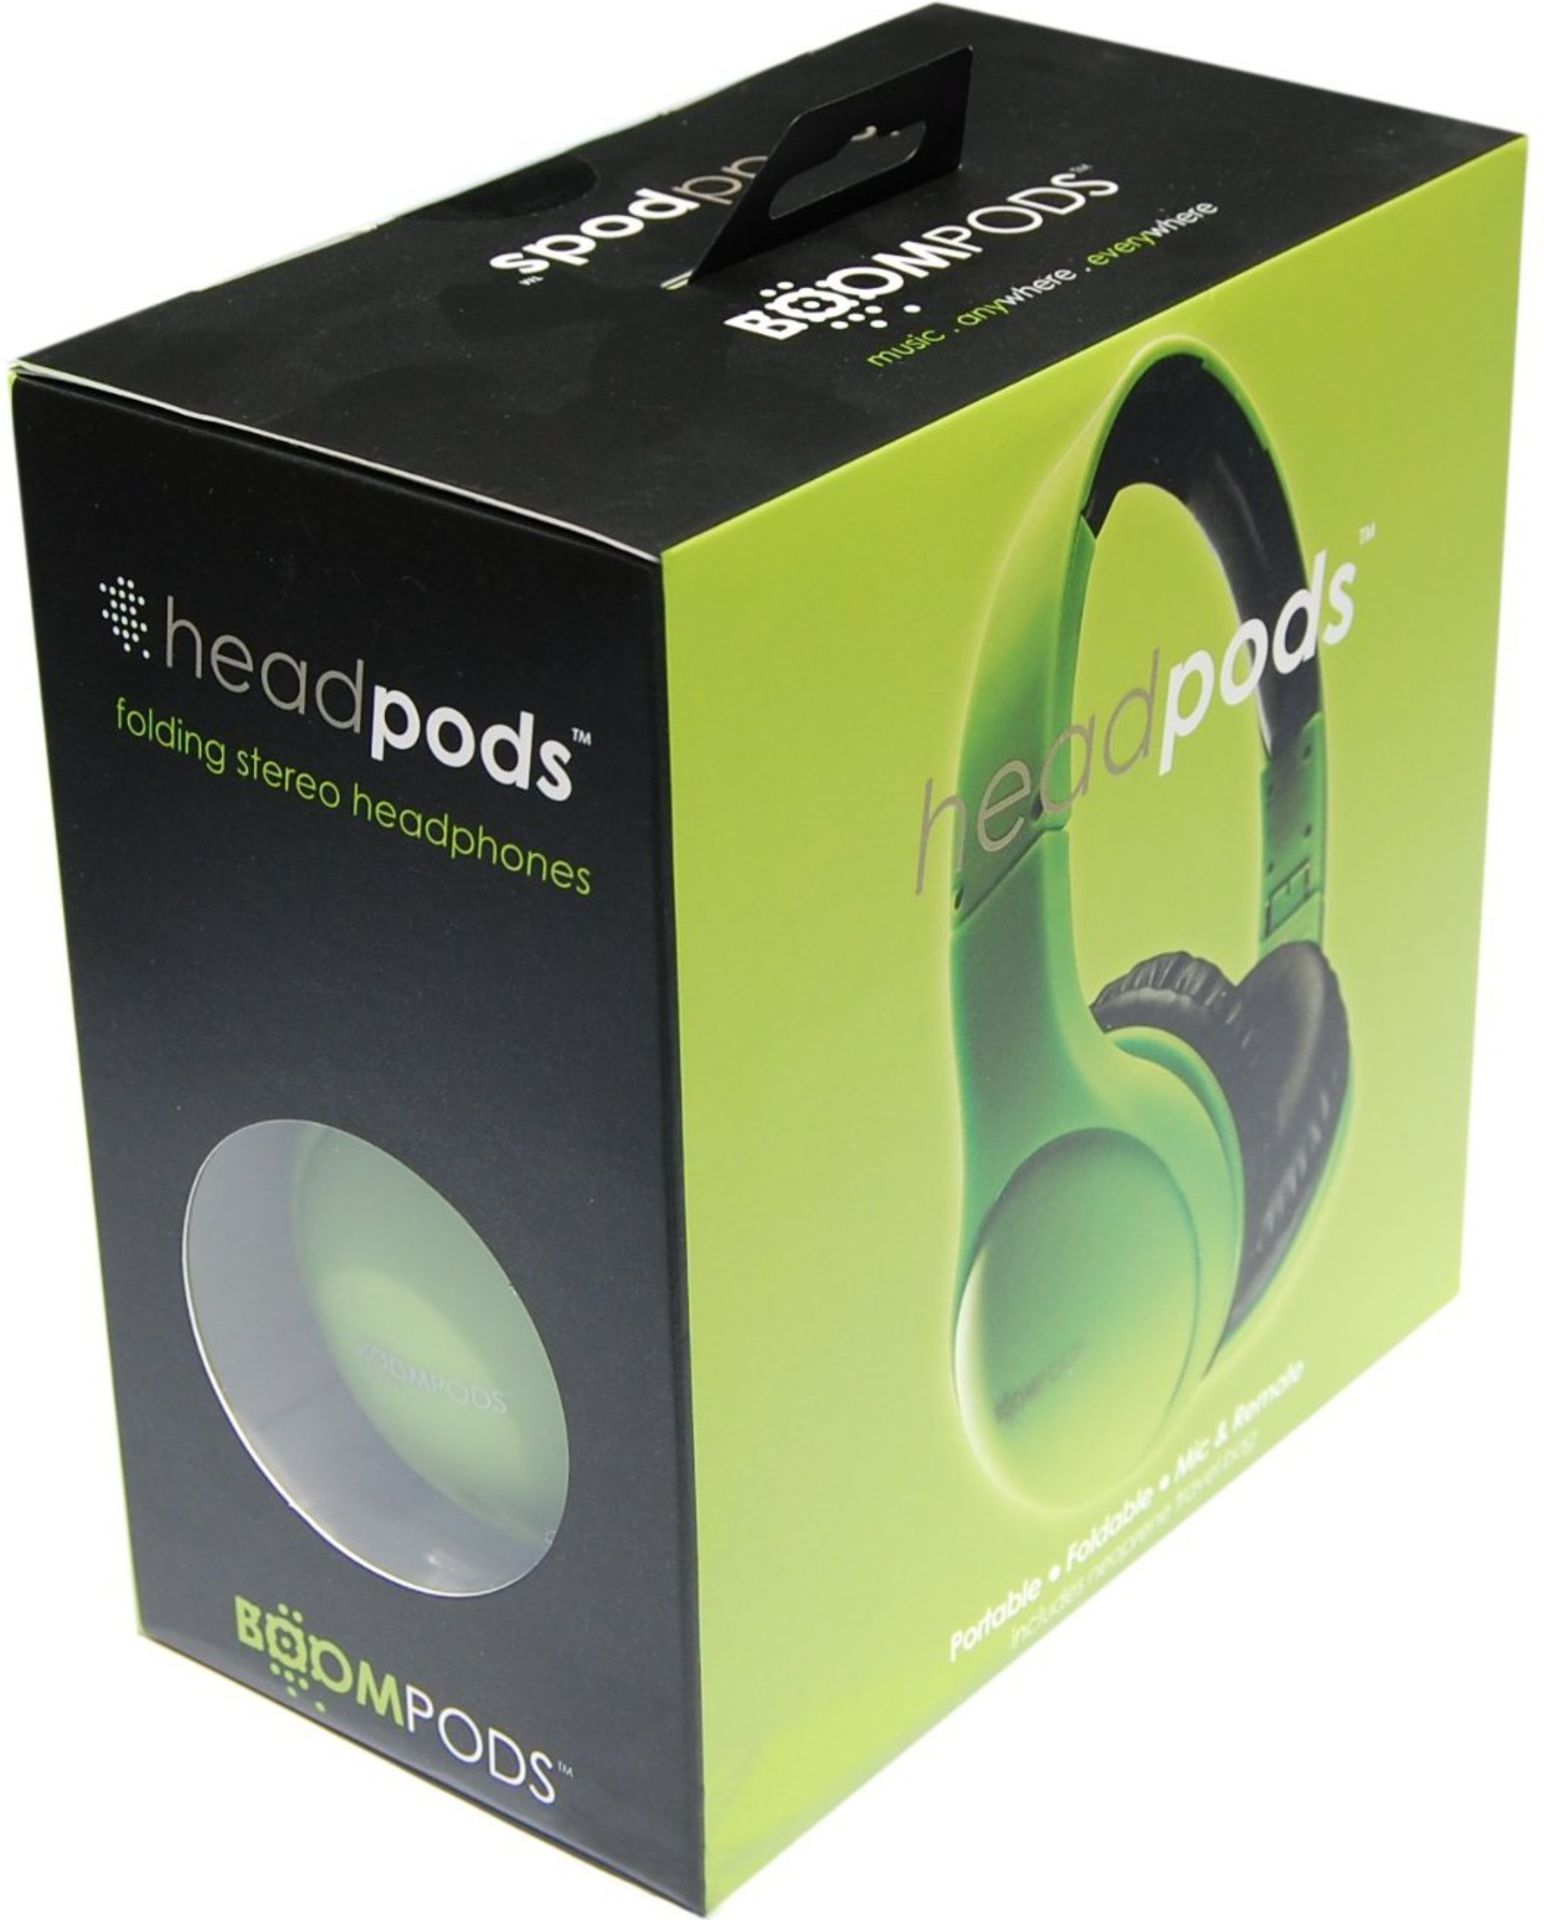 V Brand New Boompods Headpods Foldable Soft Touch Headphones In Green Includes iPhone Remote With - Image 2 of 2